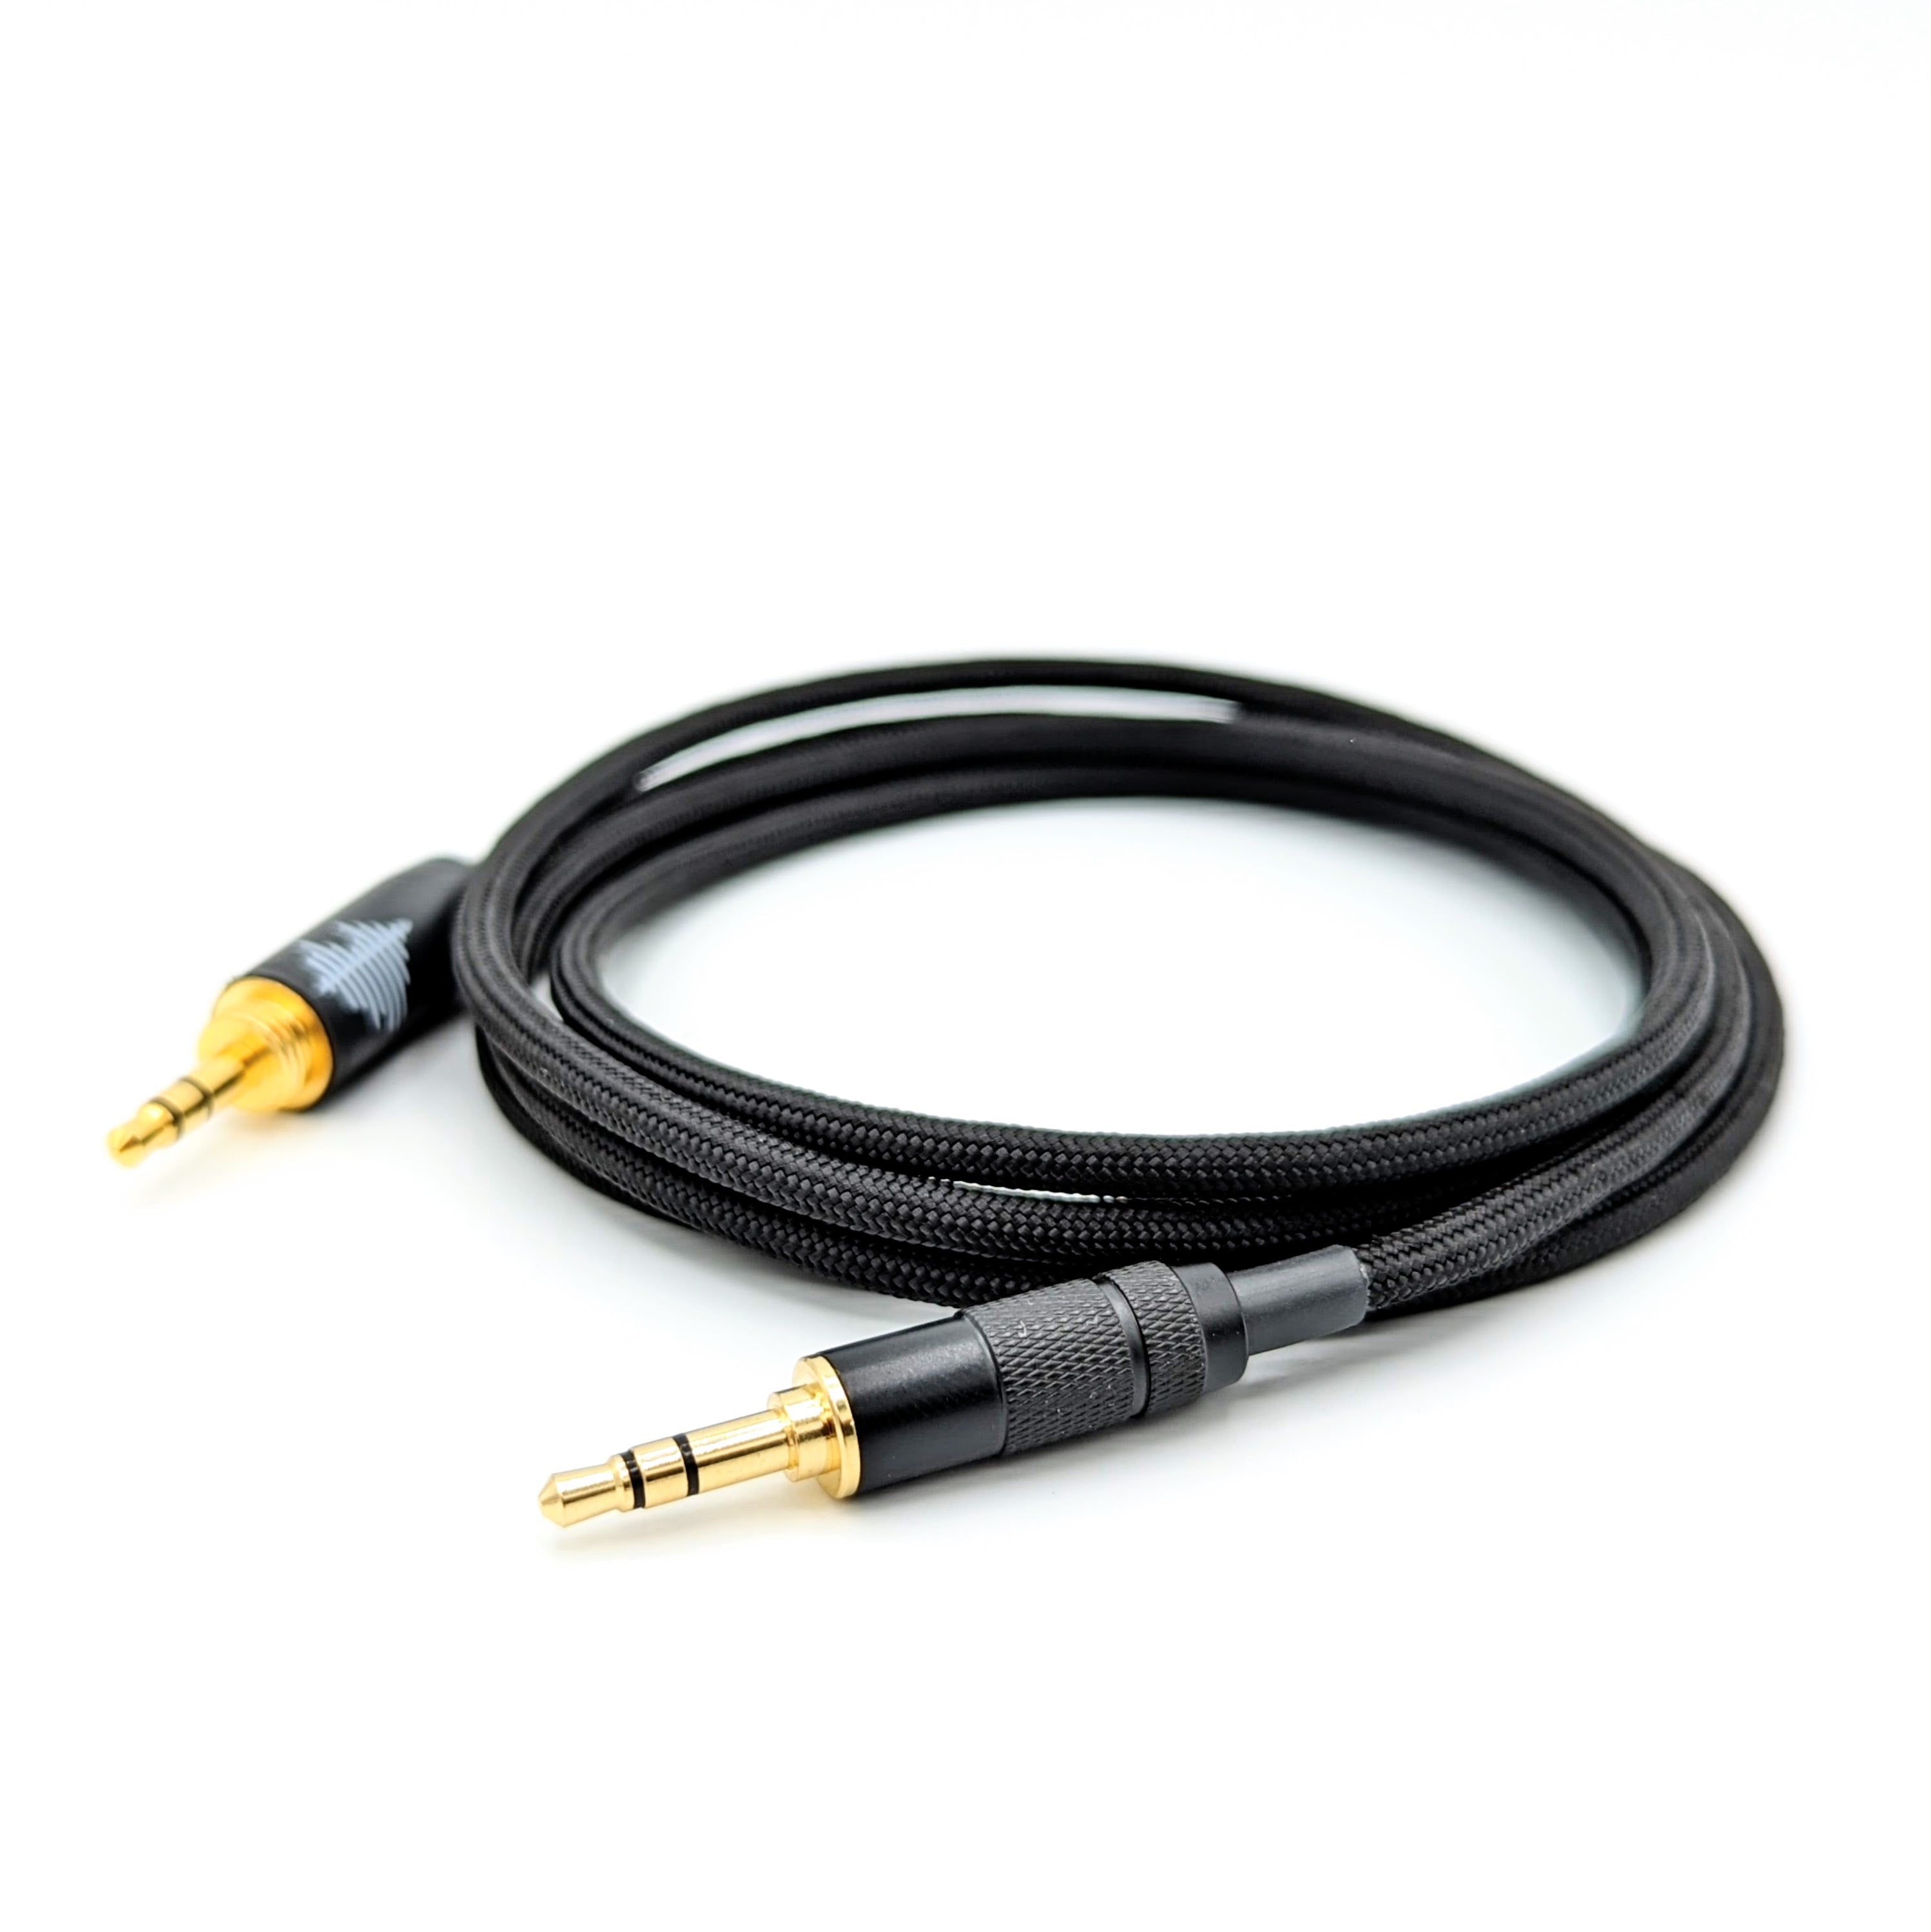 3.5mm TRS Headphone Cable for SHP9500, x2hr, cb-1 + more